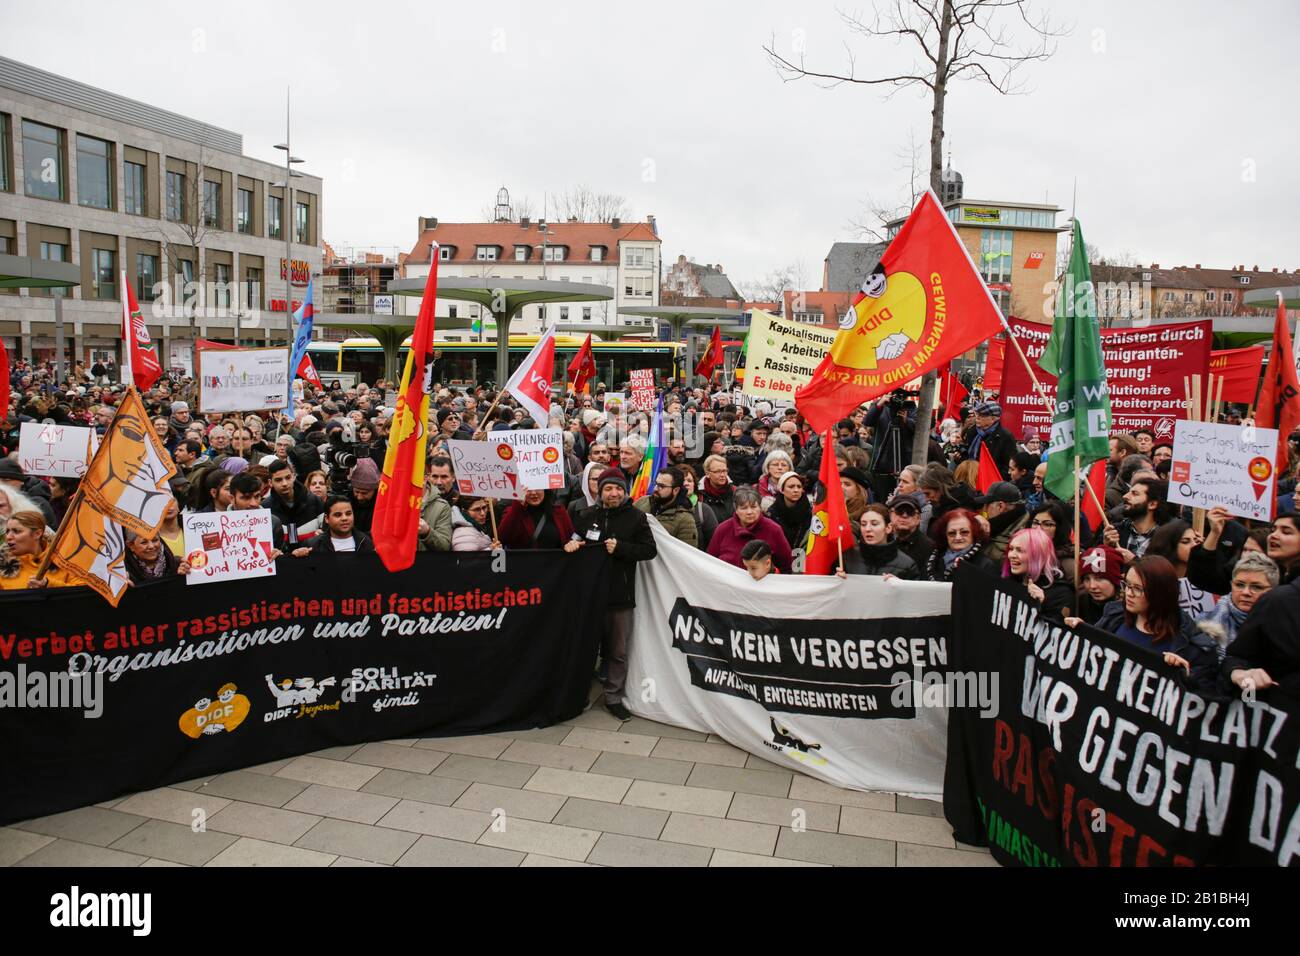 (2/22/2020) Protesters stand with flags and signs at the opening rally. Several thousand people marched through Hanau three days after the Hanau Shootings, to remember the victims and to protest against the rise in fascism and racism in Germany. (Photo by Michael Debets/Pacific Press/Sipa USA) Stock Photo